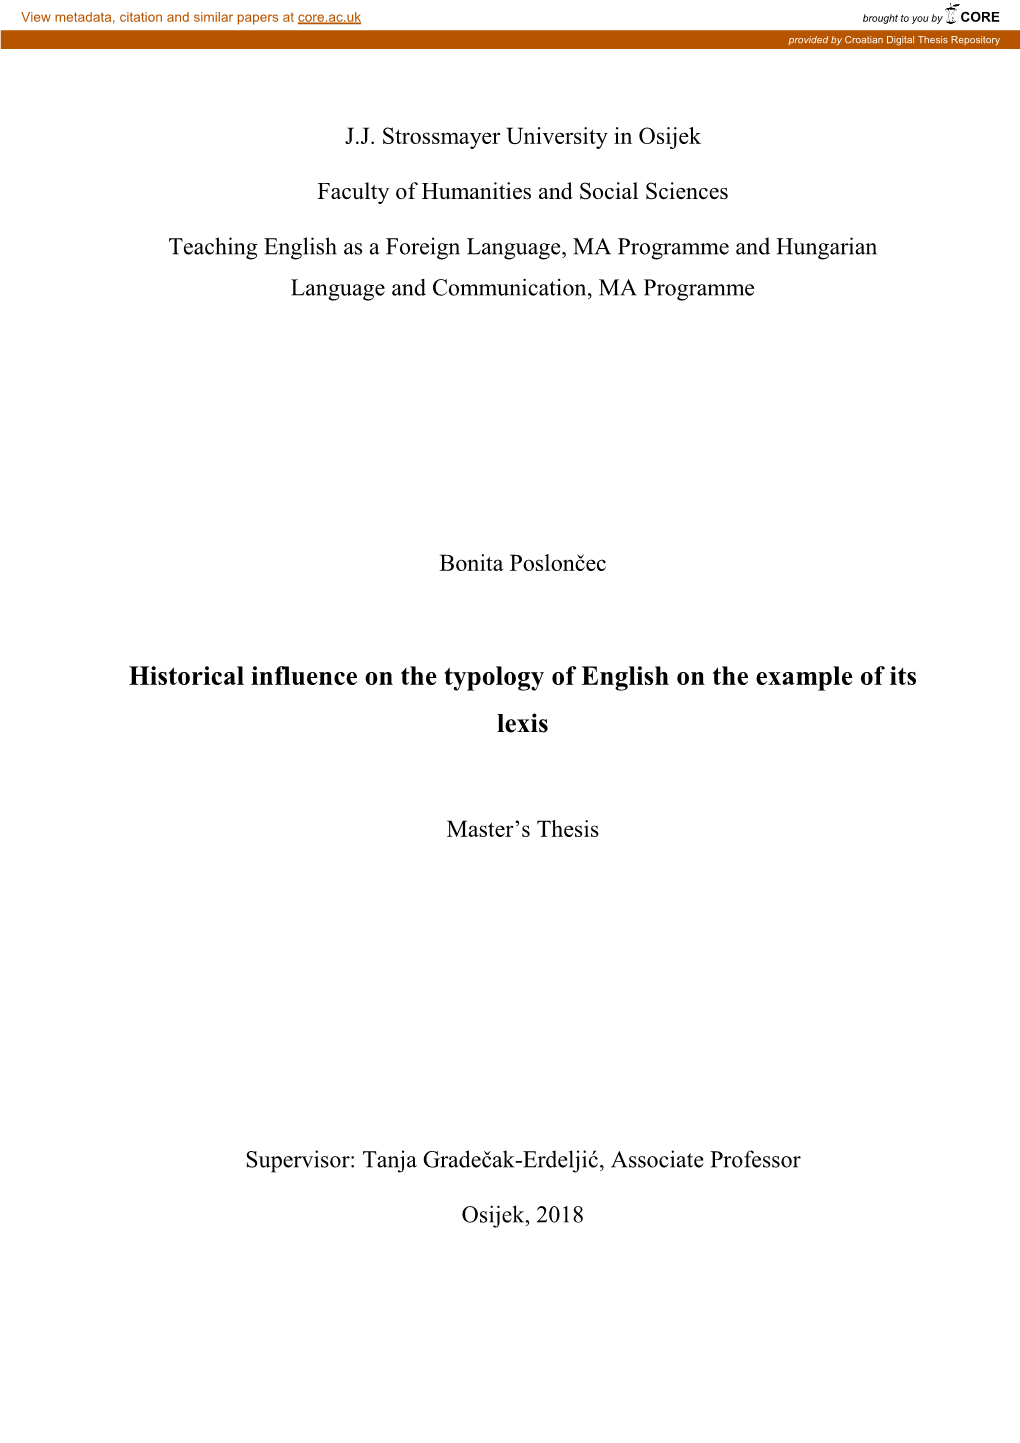 Historical Influence on the Typology of English on the Example of Its Lexis